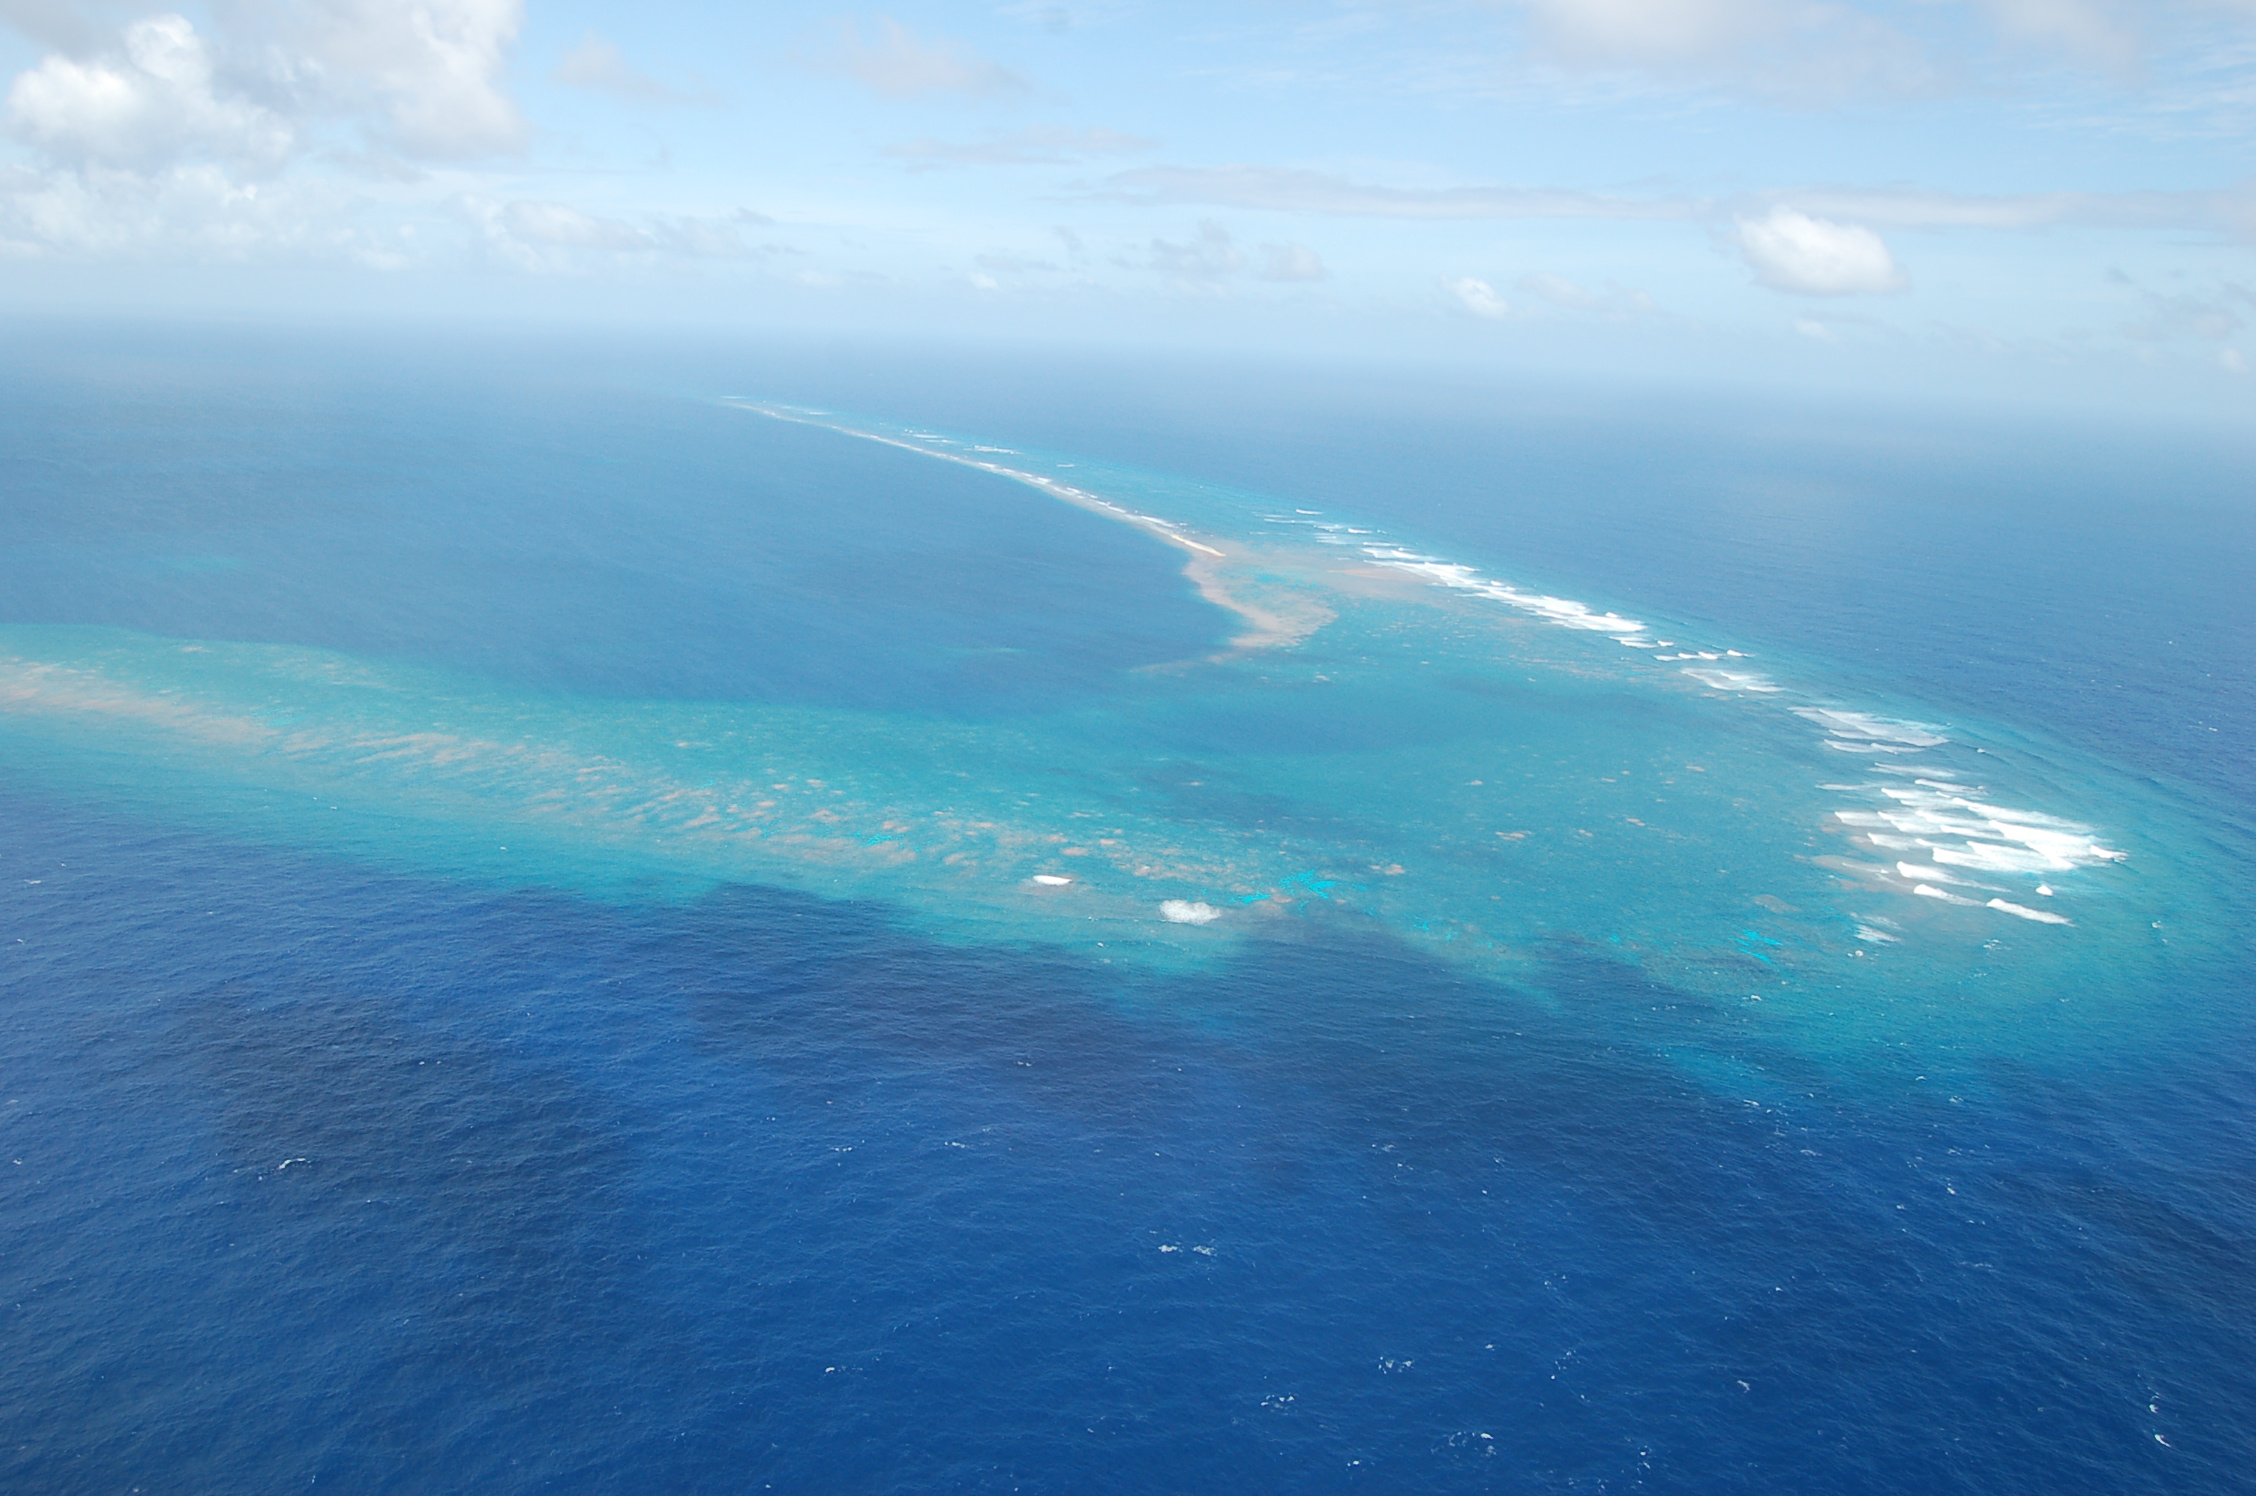 Aerial view of Kingman Reef National Wildlife Refuge. With less than five feet of elevation in most areas, Kingman Reef remains one of the most pristine coral reef atoll ecosystems in the Pacific Ocean. Located 932 miles southwest of Hawaiʻi, the crystal clear waters and vibrant corals support a spectacular diversity of algae, fish, marine mammals, sea turtles, and migratory birds.